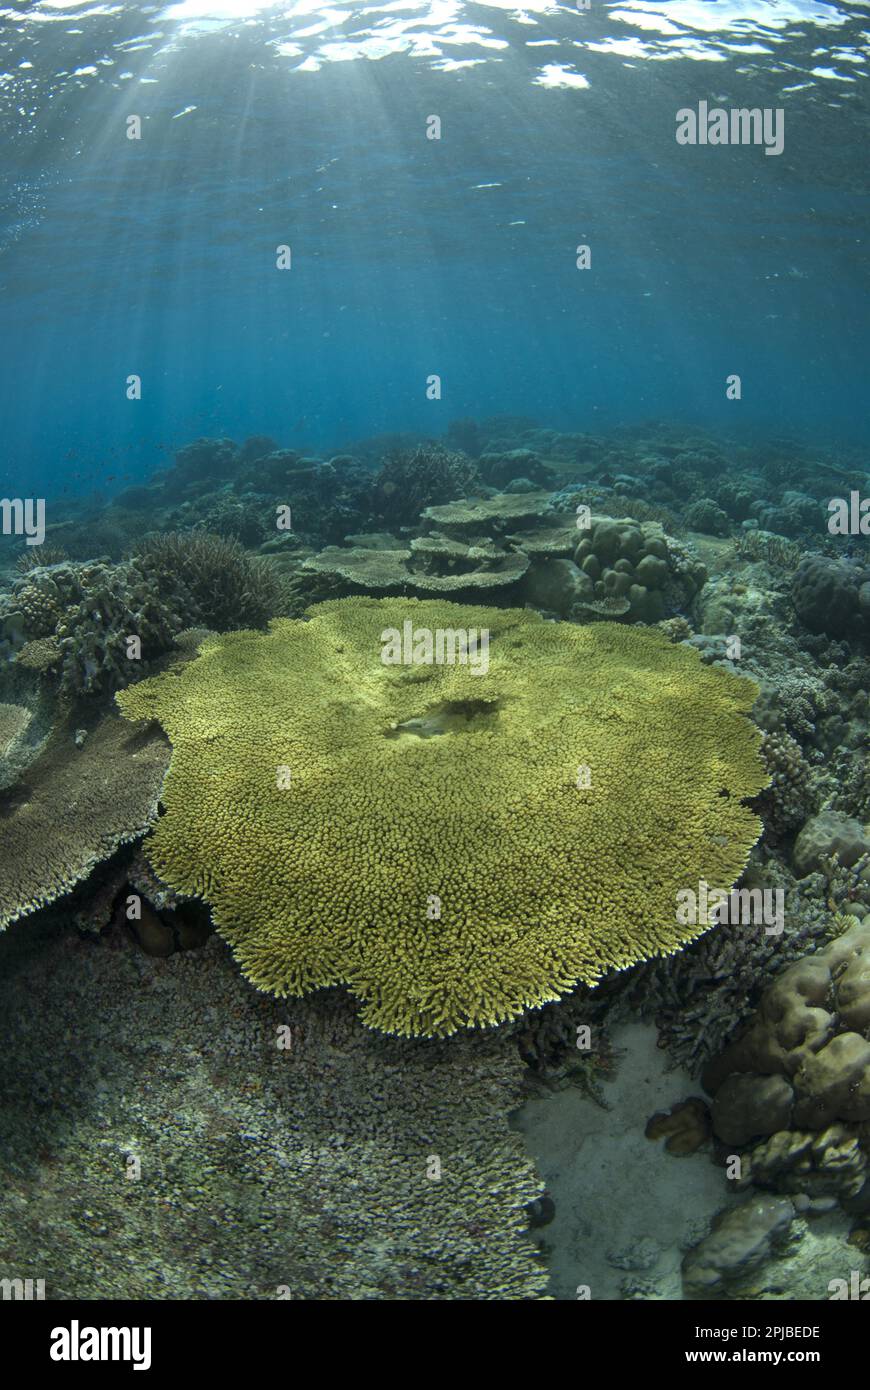 Stony coral, Stony corals, Other animals, Corals, Cnidarians, Animals, Table Coral (Acropora spec.) in reef habitat, Ameth Point, Nusa Laut, near Stock Photo